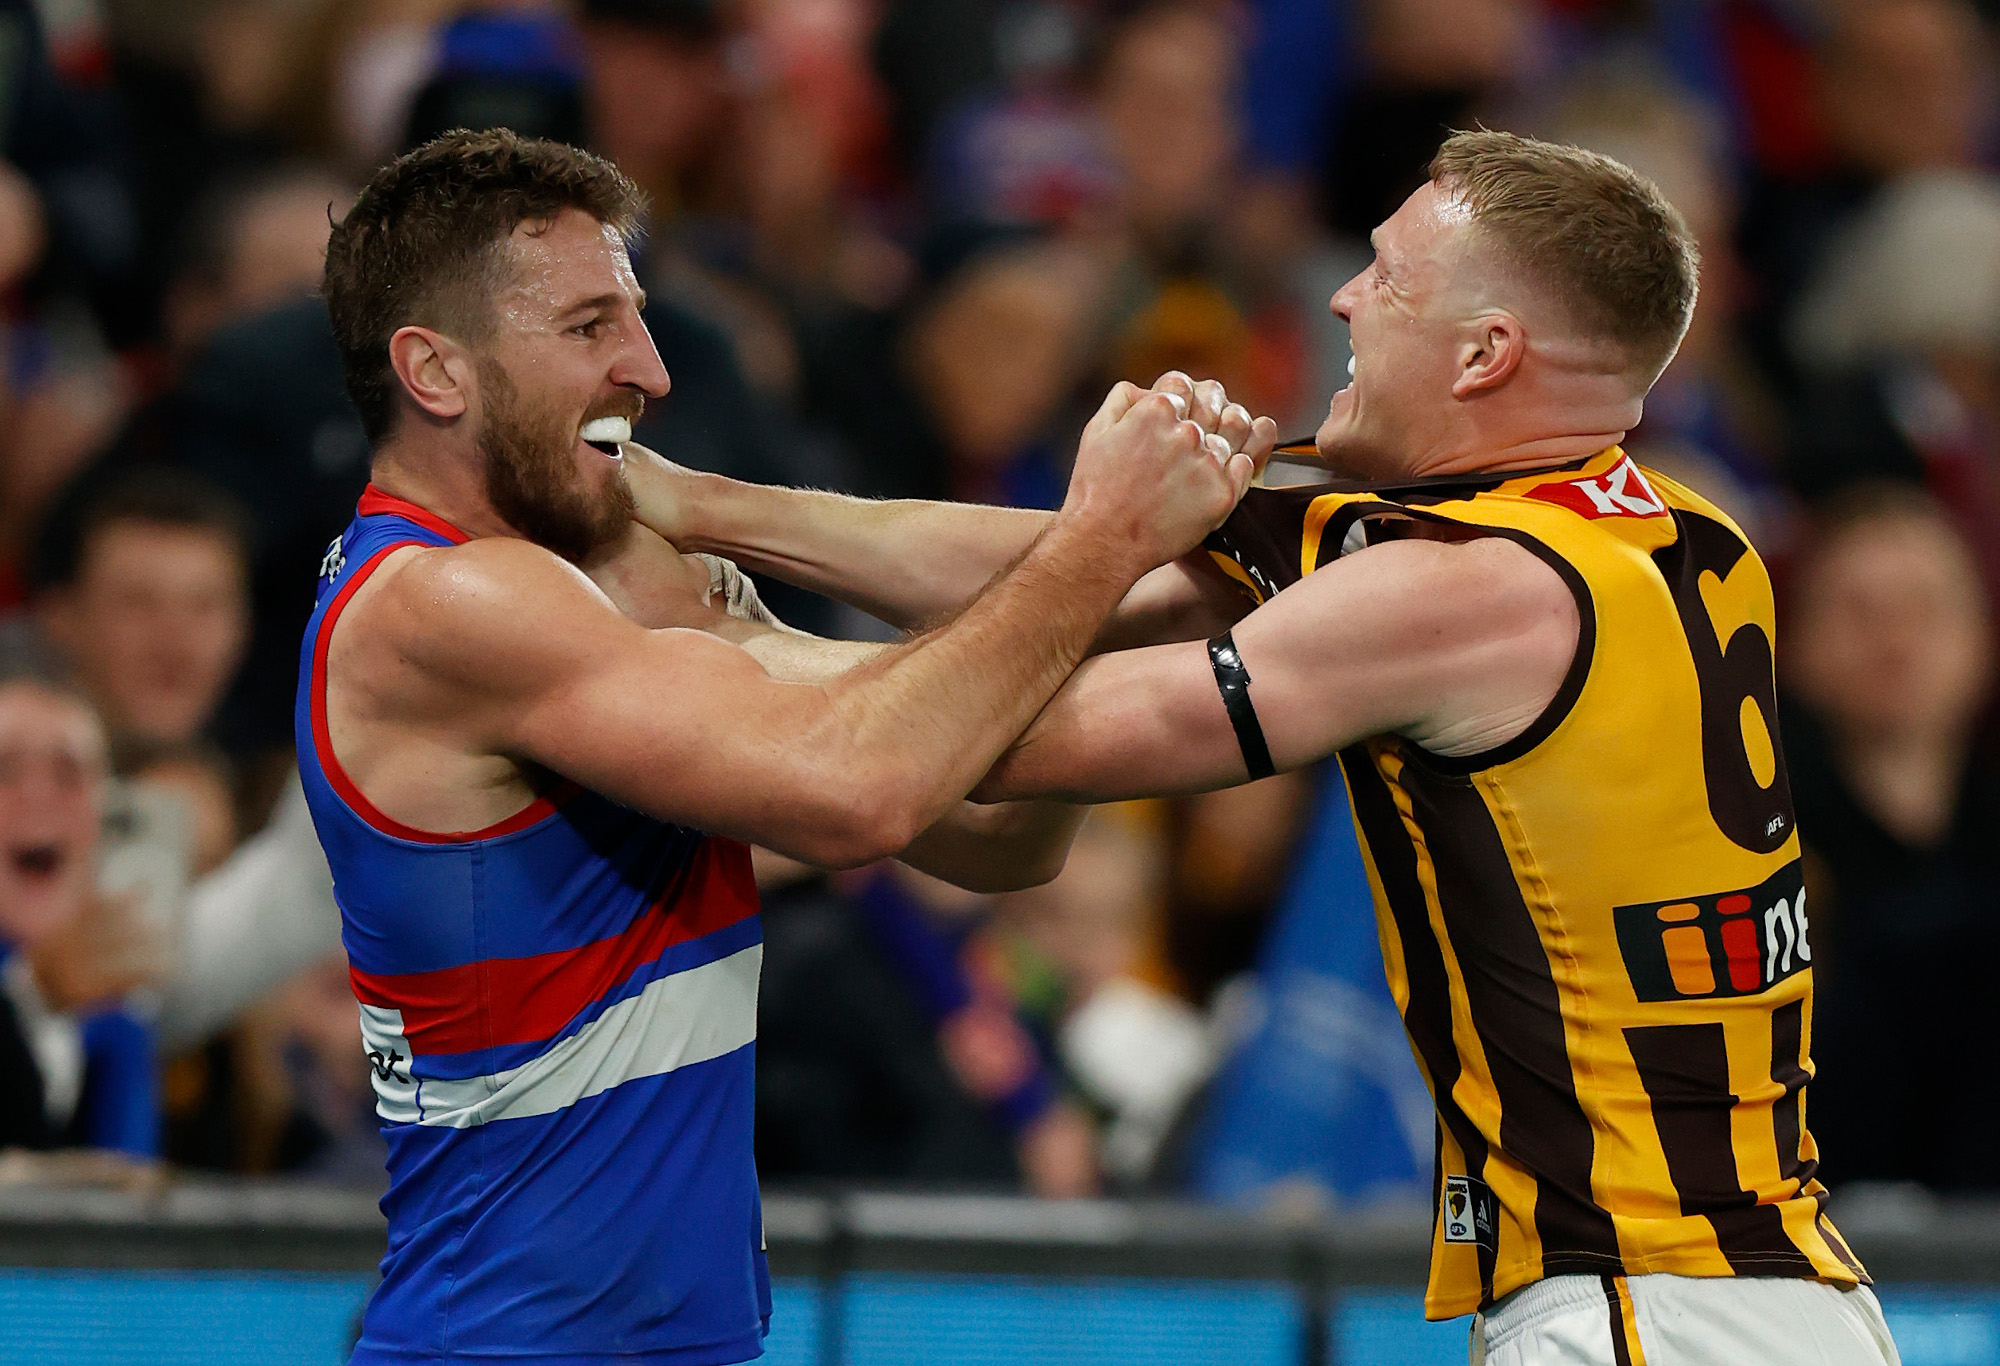 AFL Round 12 Expert Tips & Betting Odds